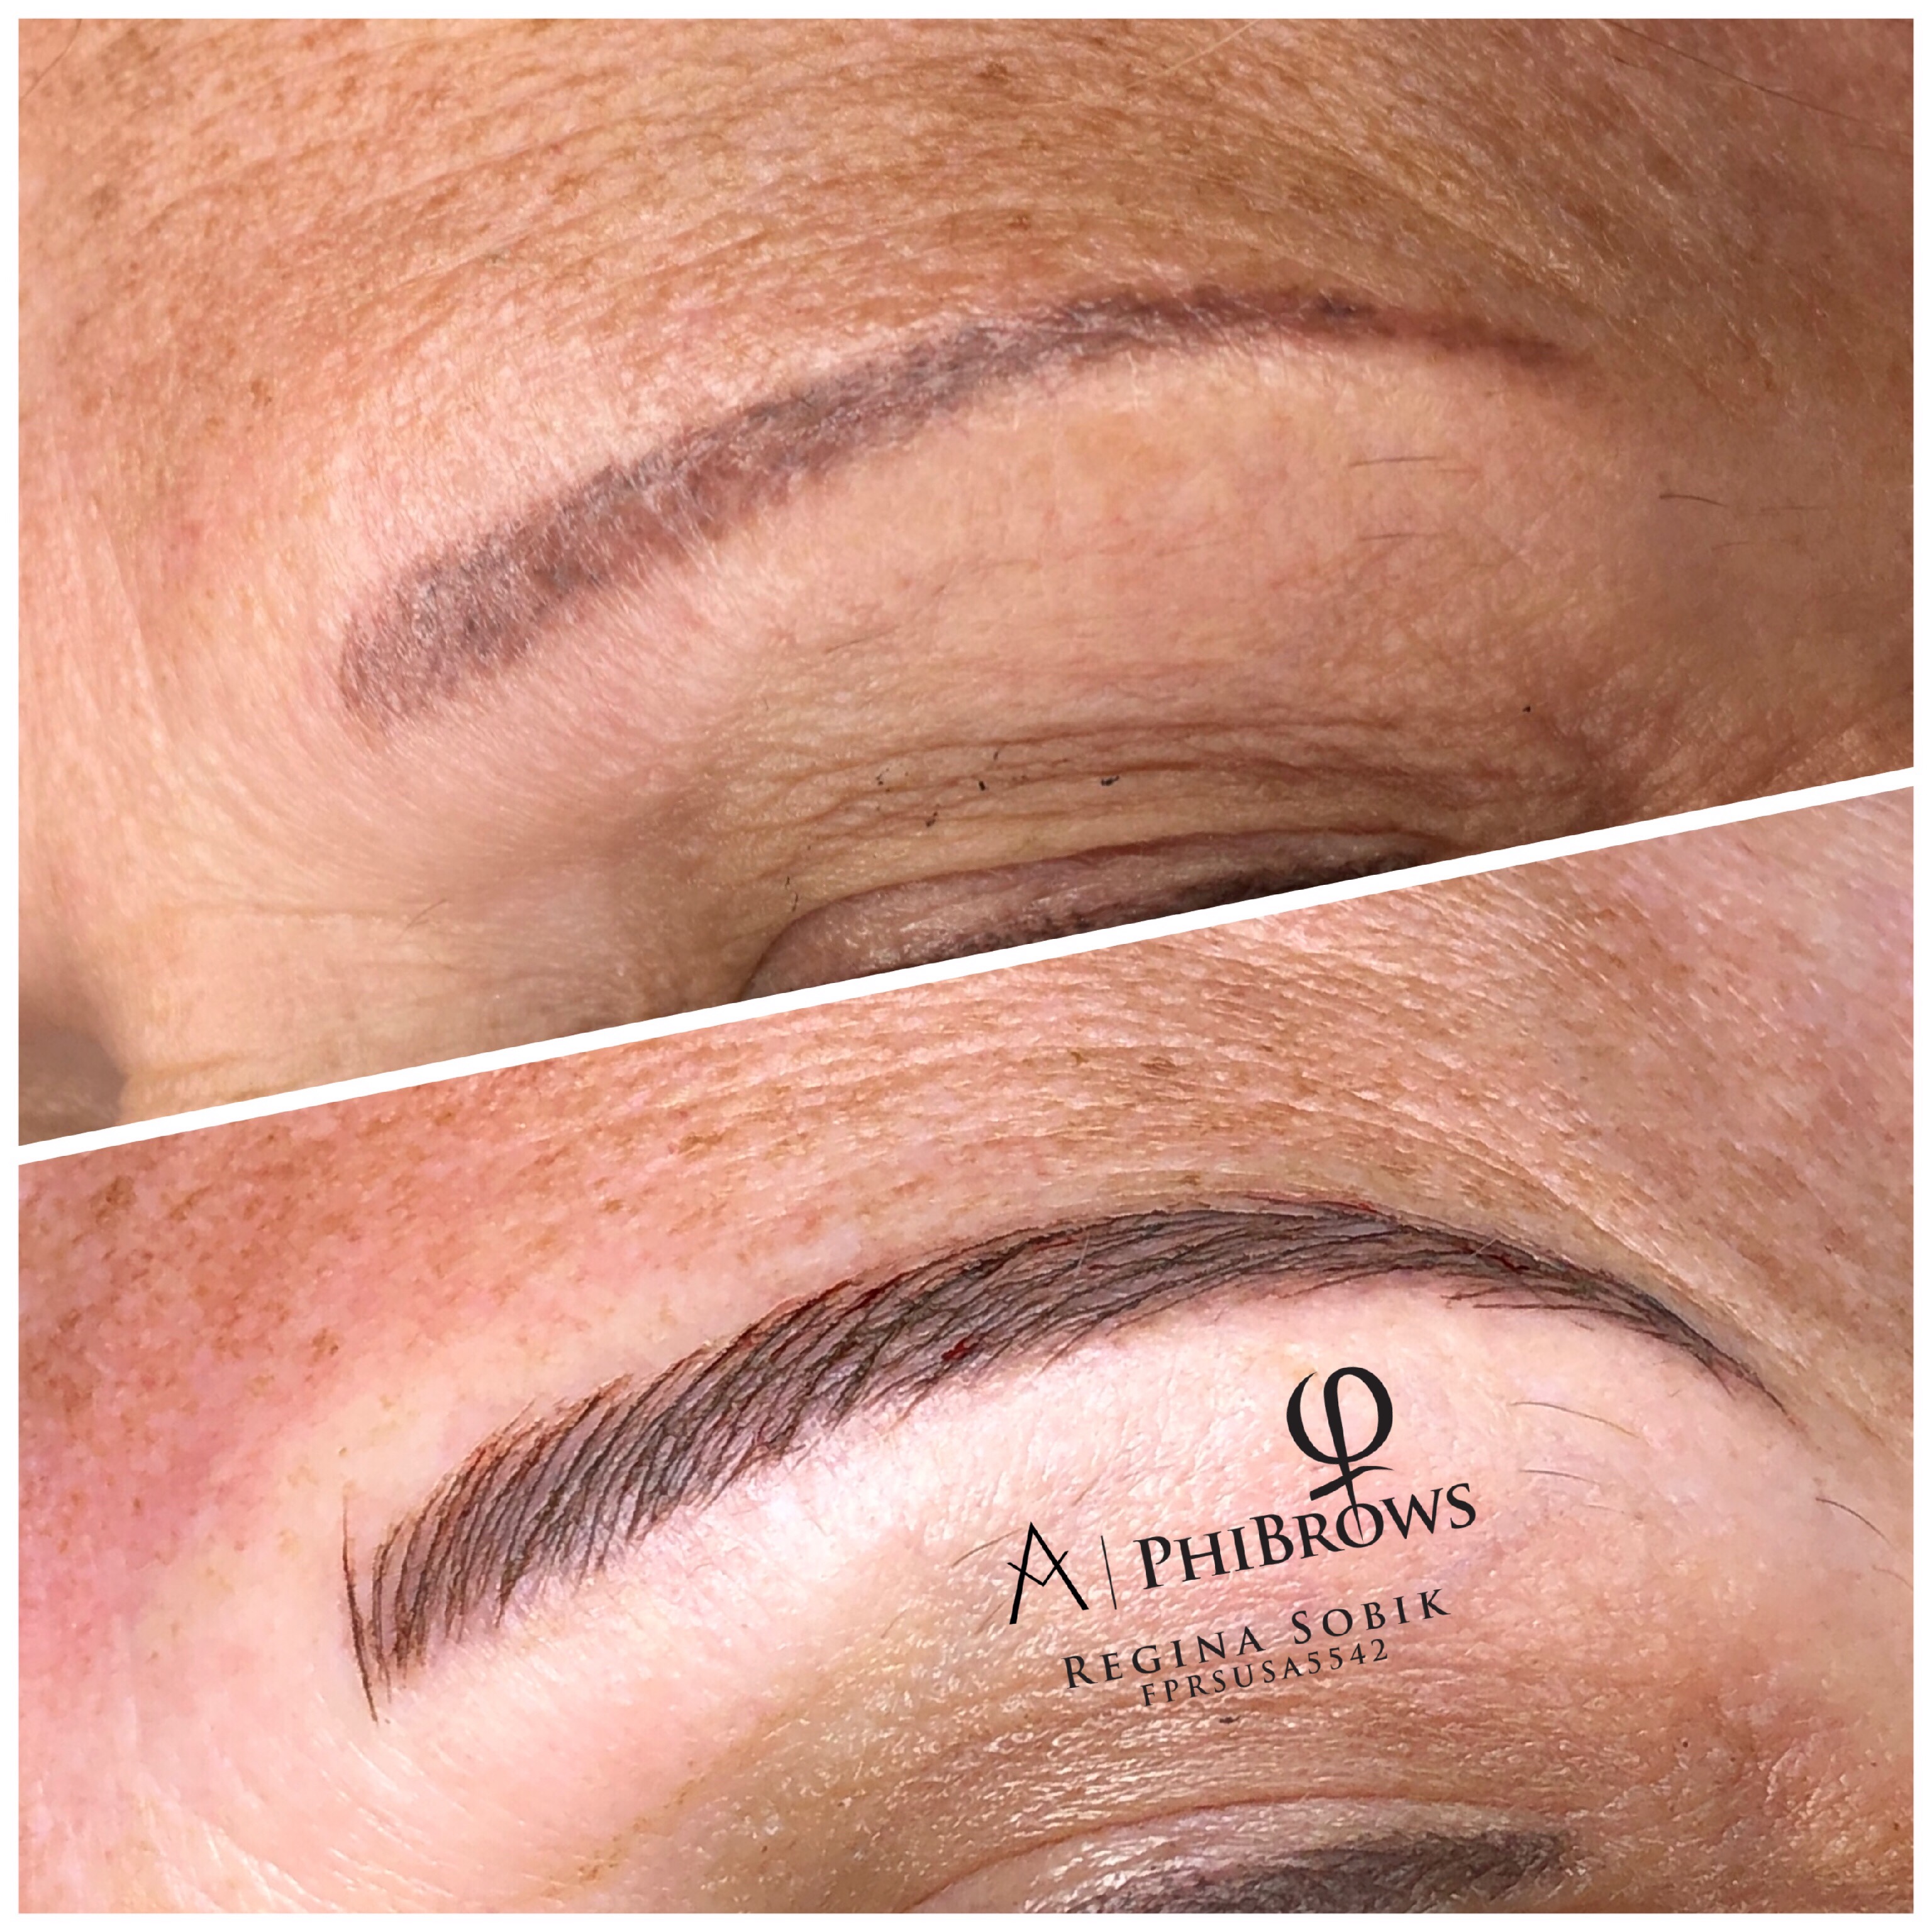 Microblading touchup after 2 years 